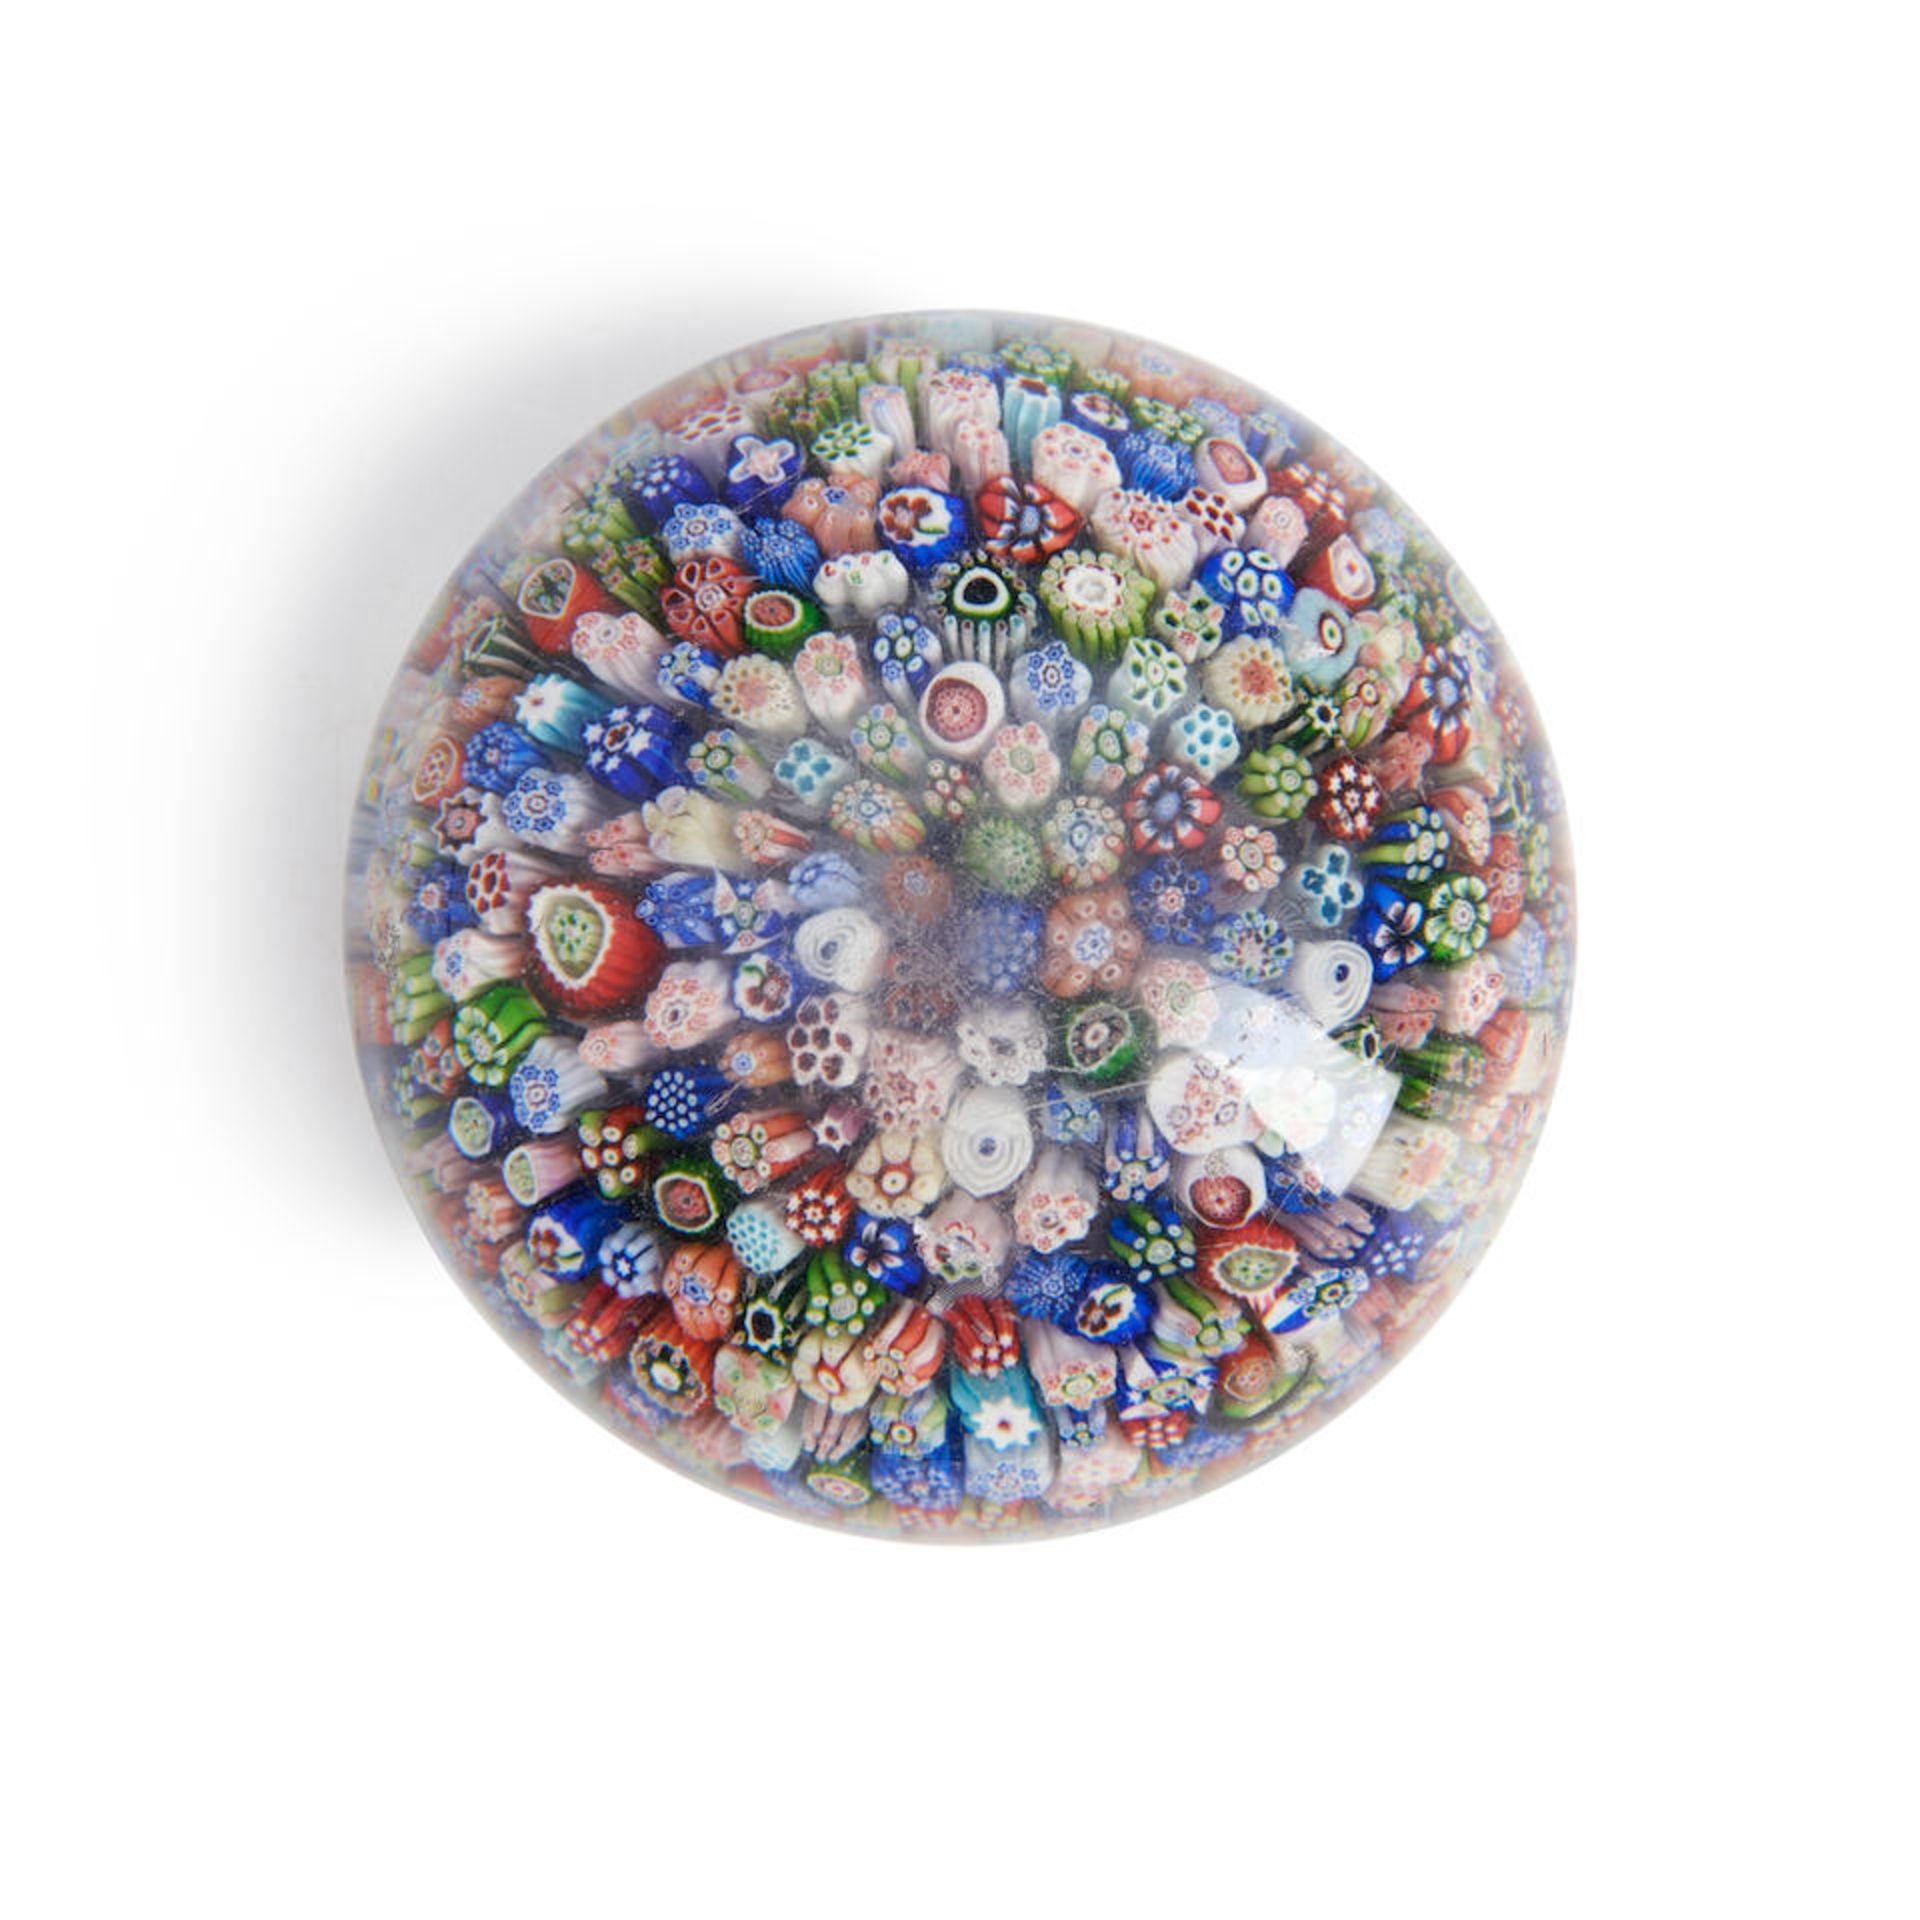 BACCARAT CLOSE-PACKED MILLEFIORI GLASS PAPERWEIGHT, France, dated 1847, ht. 2 1/4, dia. 3 in.